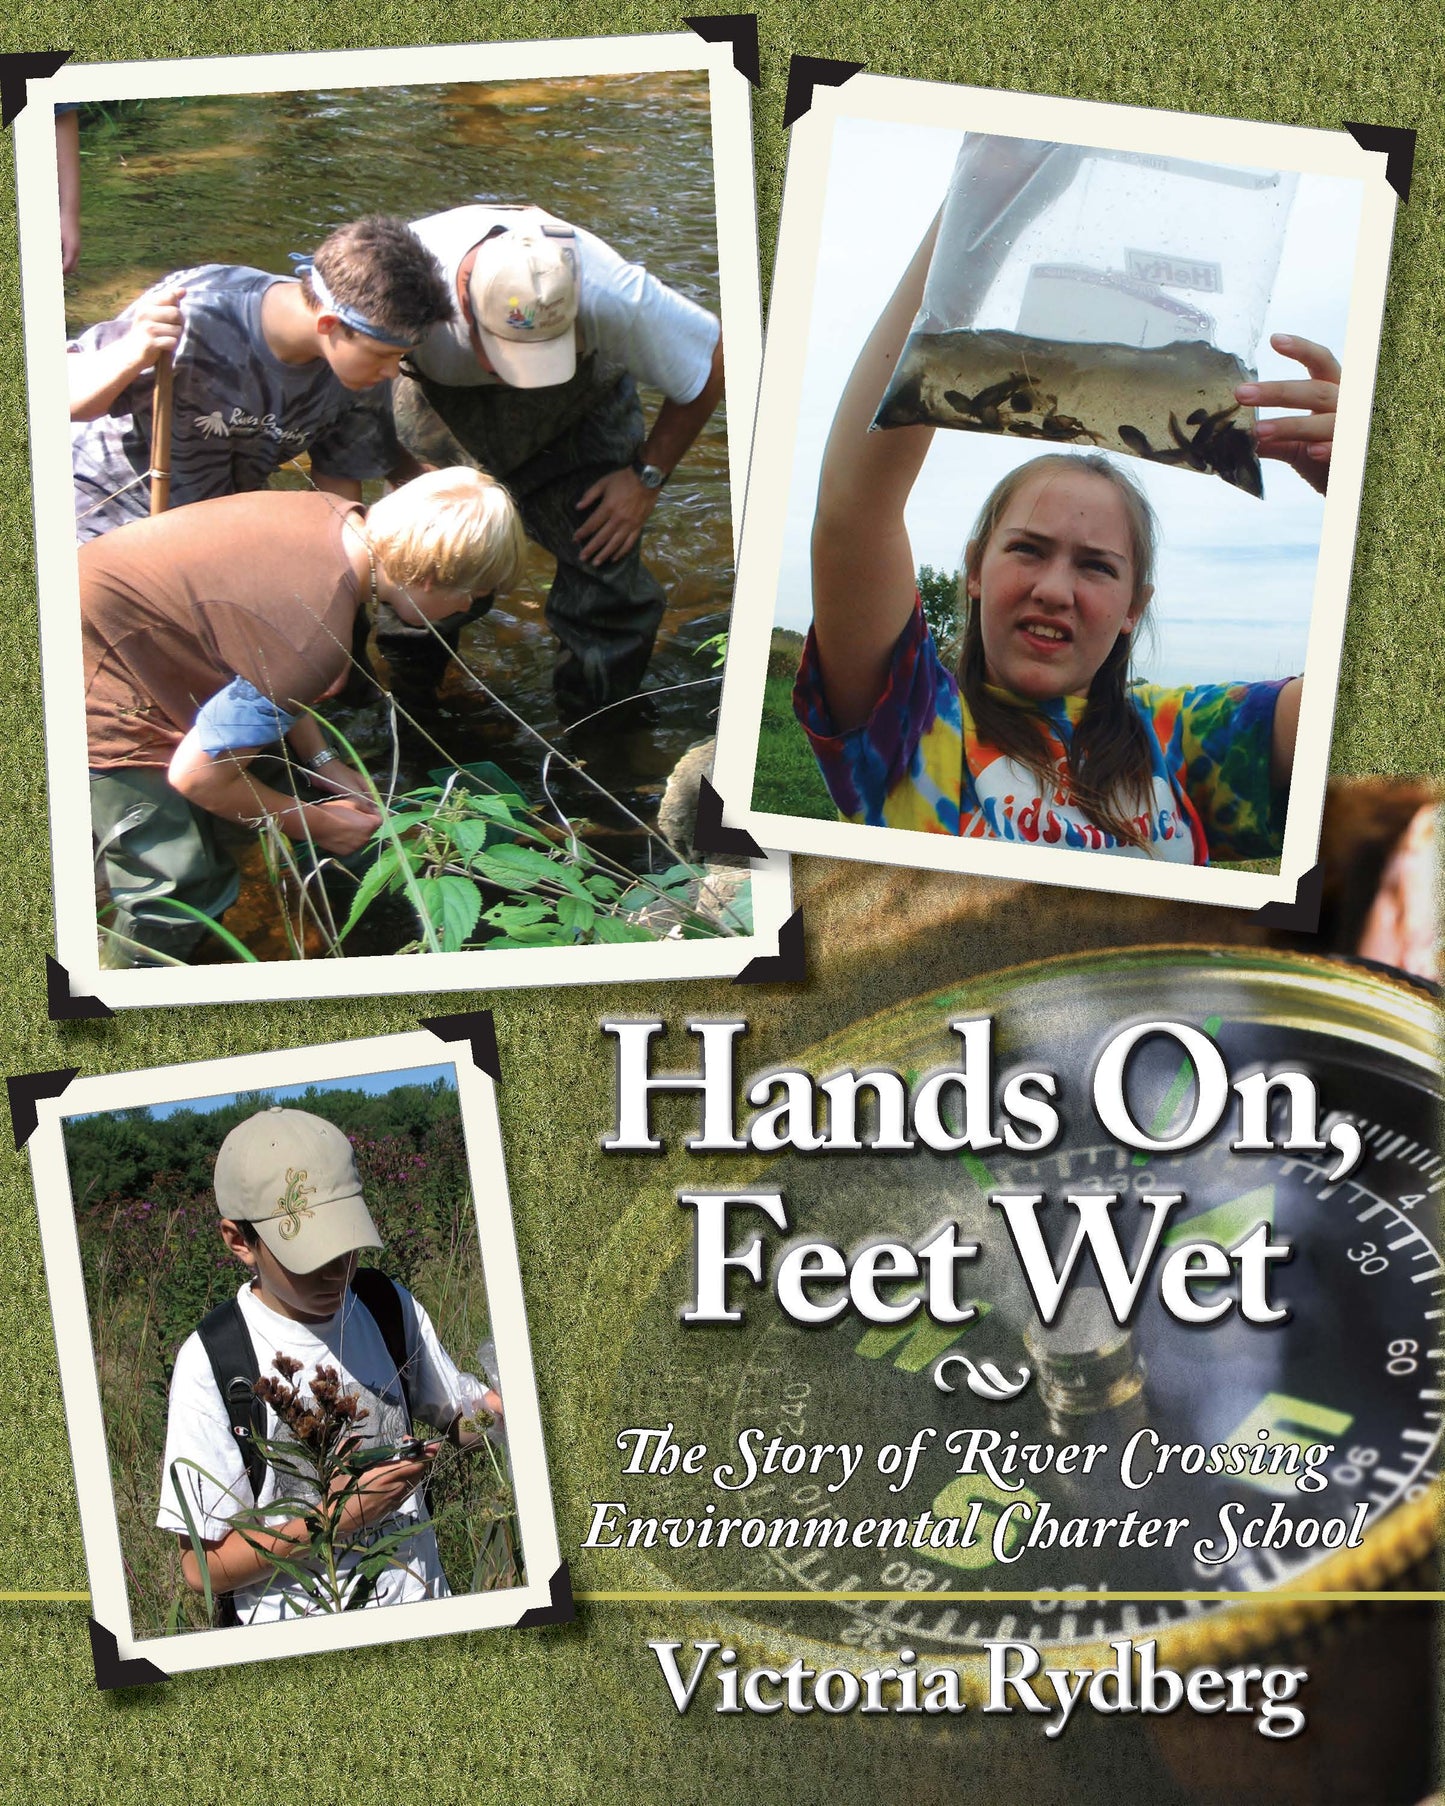 Hands On, Feet Wet: The Story of River Crossing Environmental Charter School